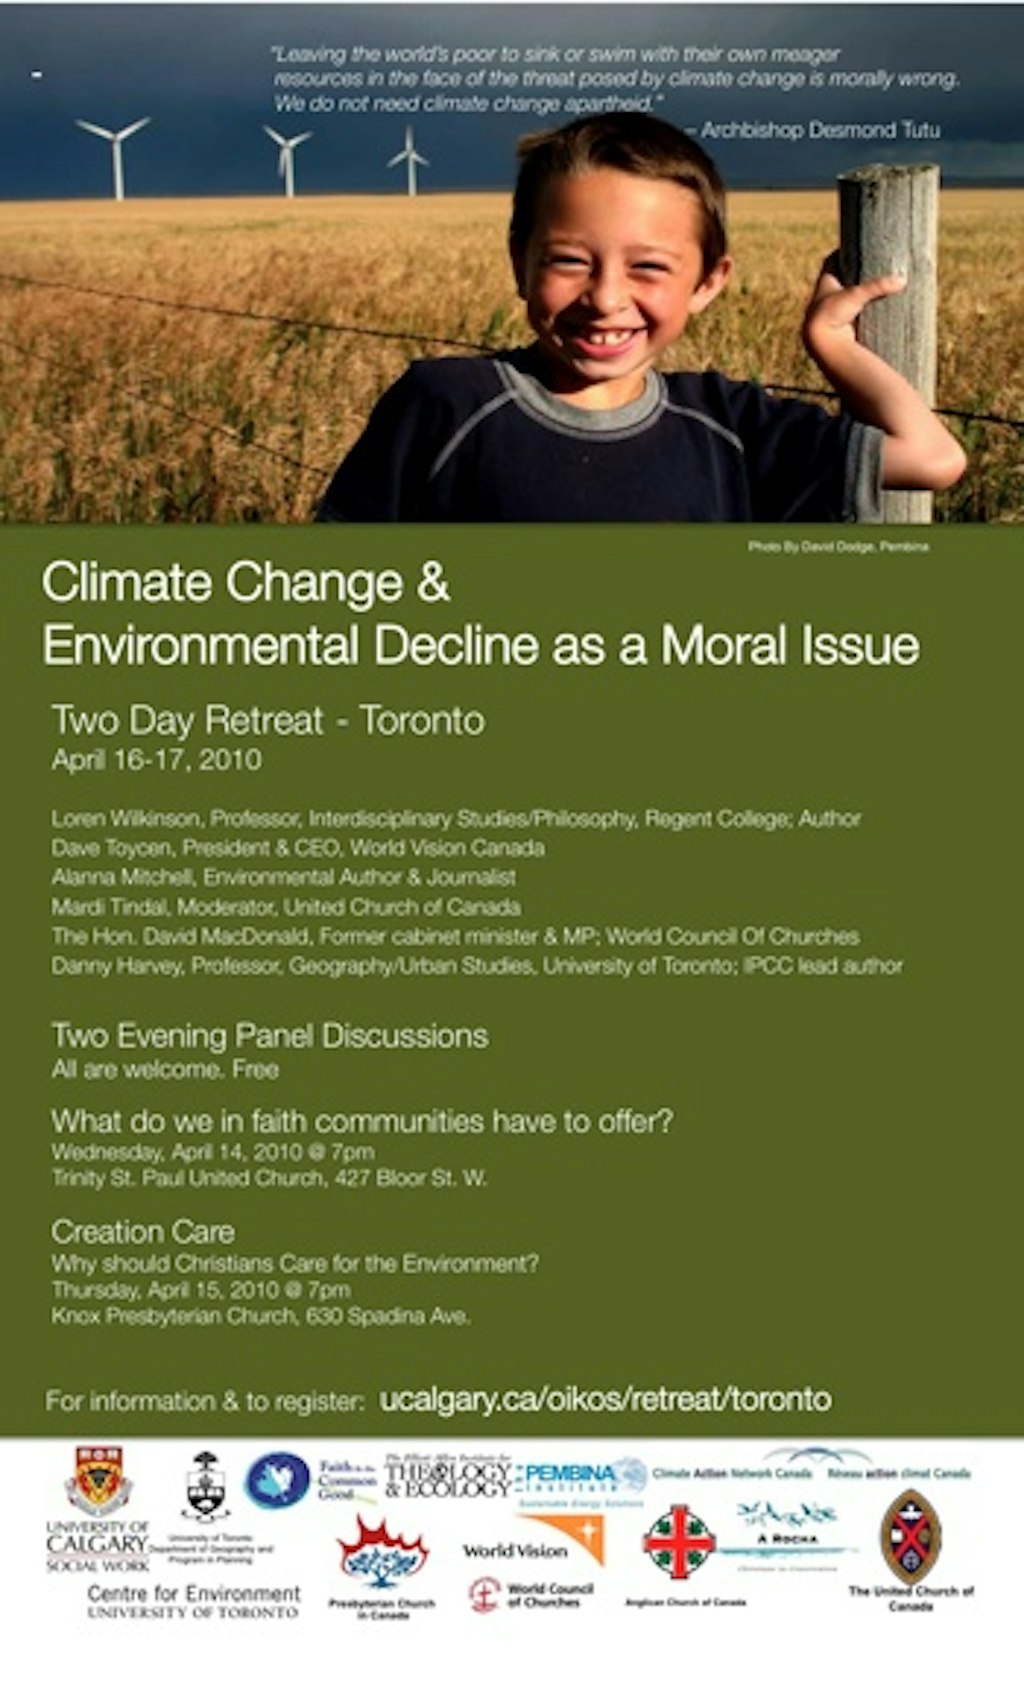 Exploring the moral dimensions of climate change